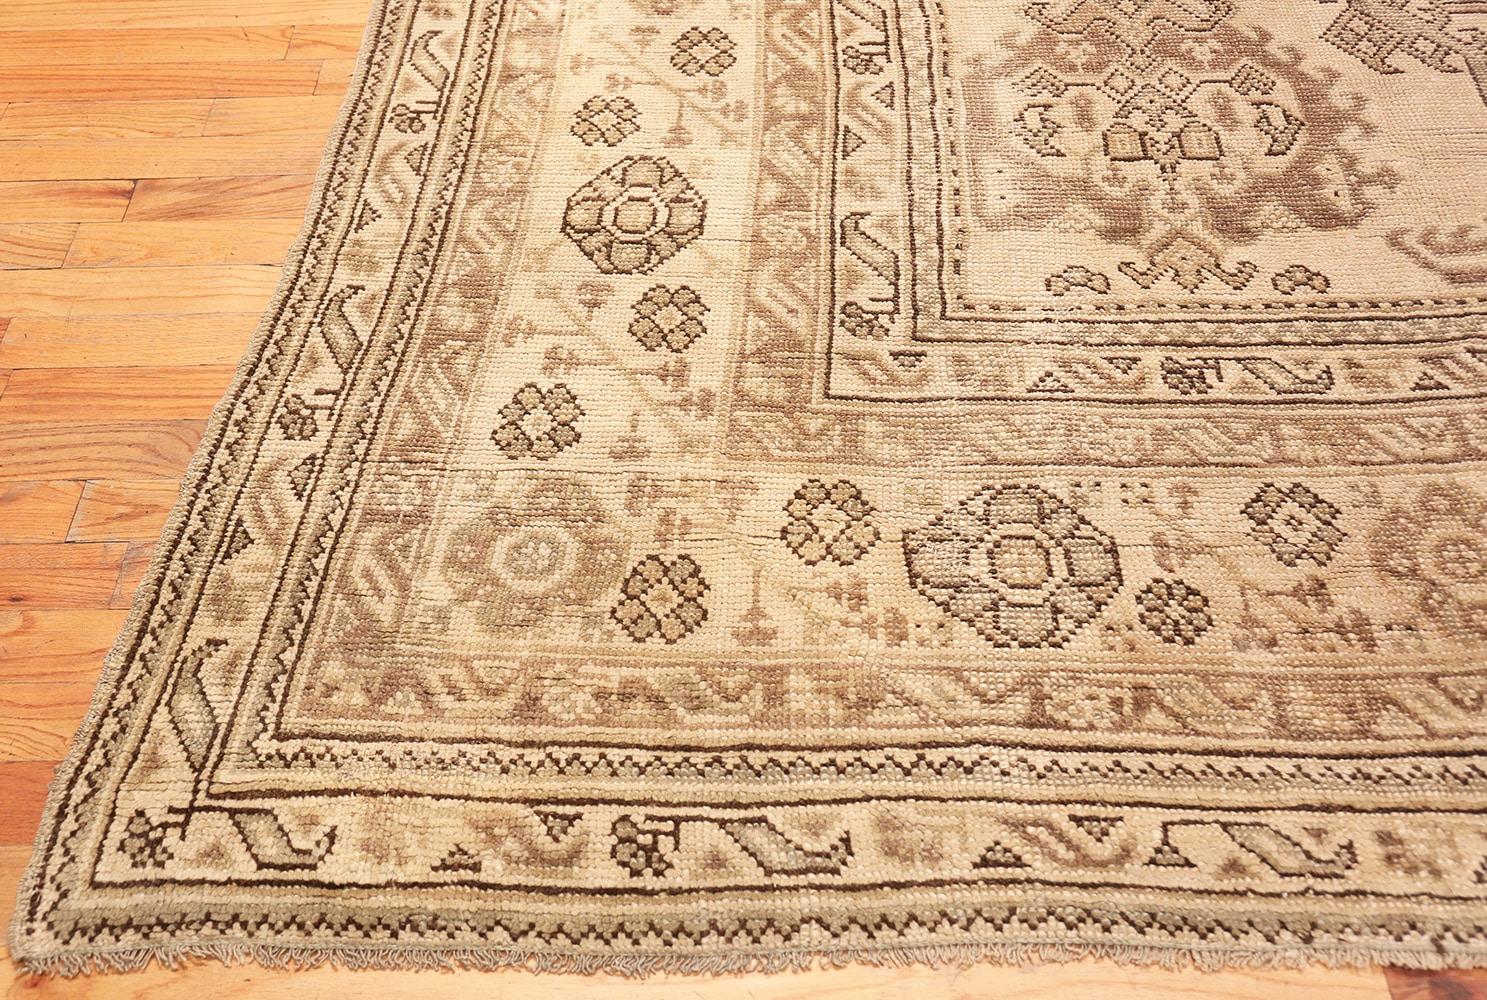 Very large and square antique Turkish Oushak carpet, Country of Origin: Turkey, circa early 20th century – Size: 17 ft 7 in x 18 ft 7 in (5.36 m x 5.66 m)

Impressive in its style and scale, this magnificent antique Oushak rug features a